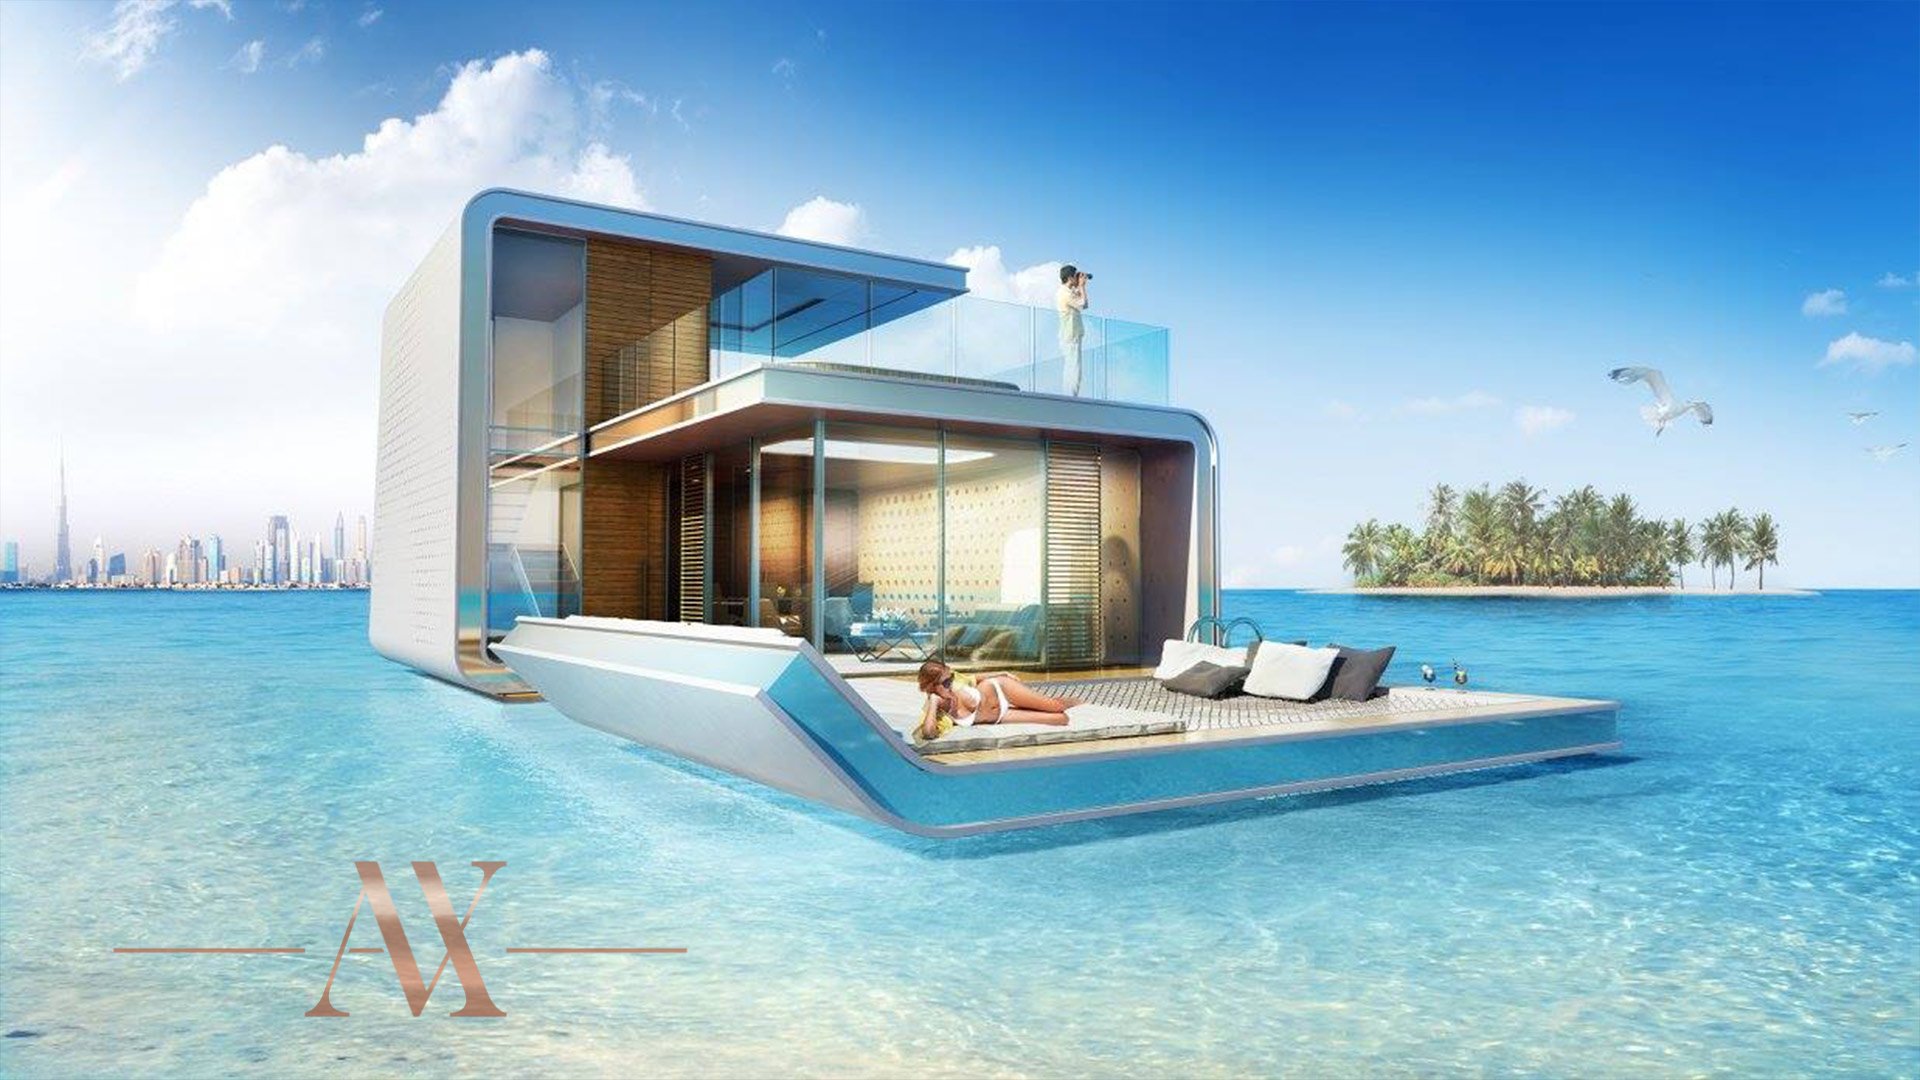 THE FLOATING SEAHORSE VILLAS by the sea - photo 1